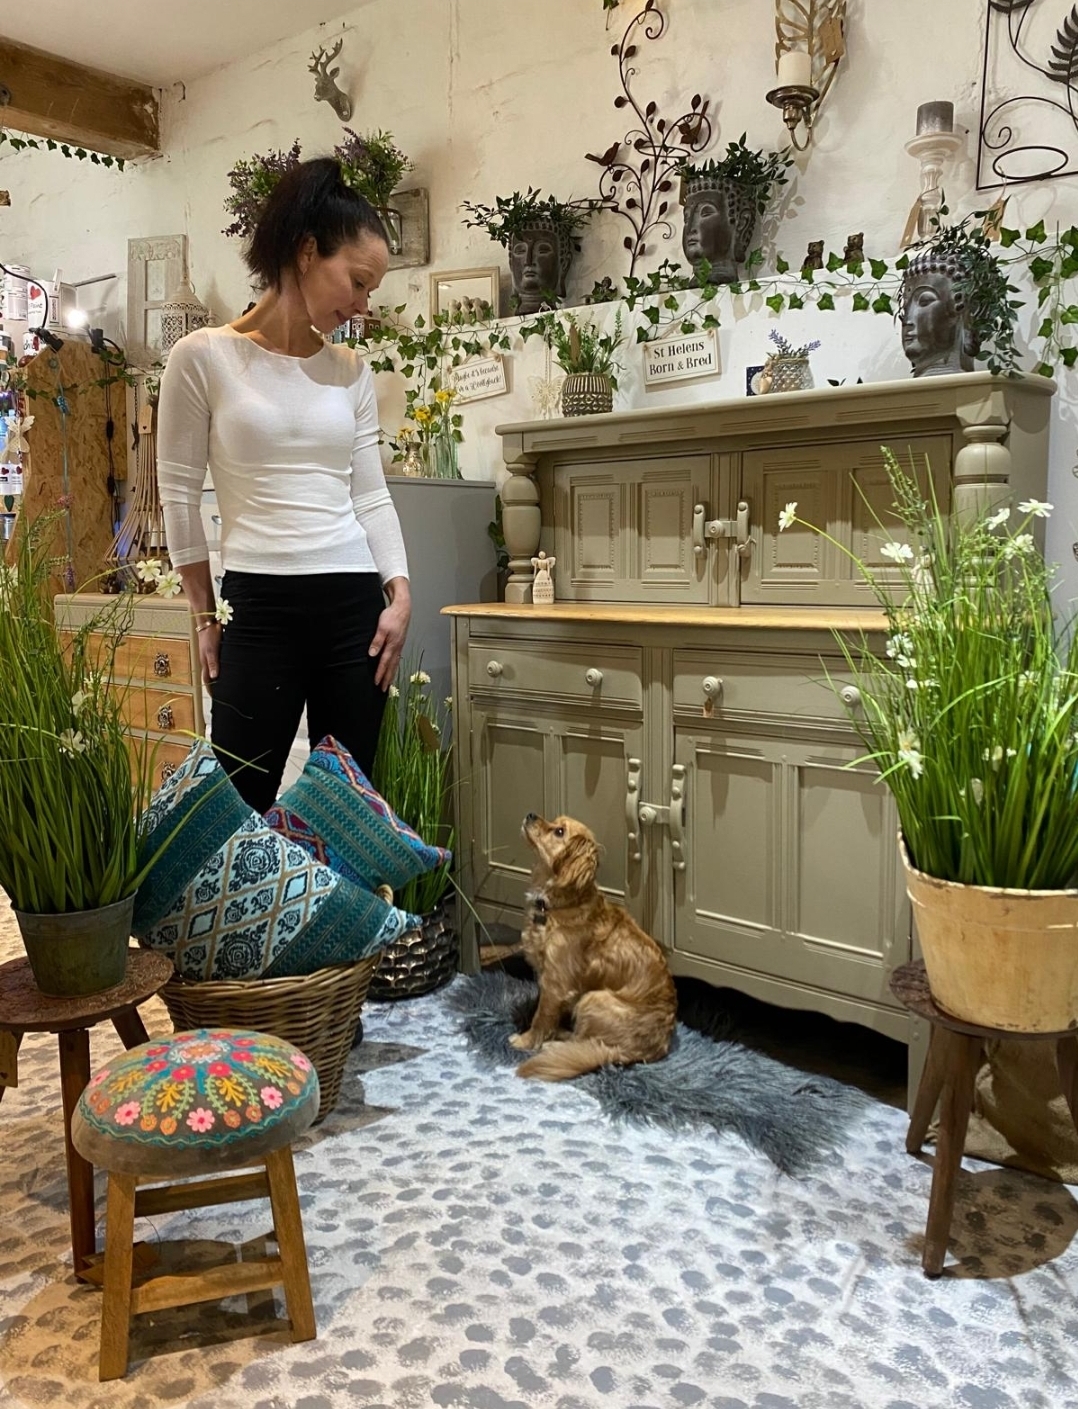 Rachel Hayhow opened her upcycling business in March 2018